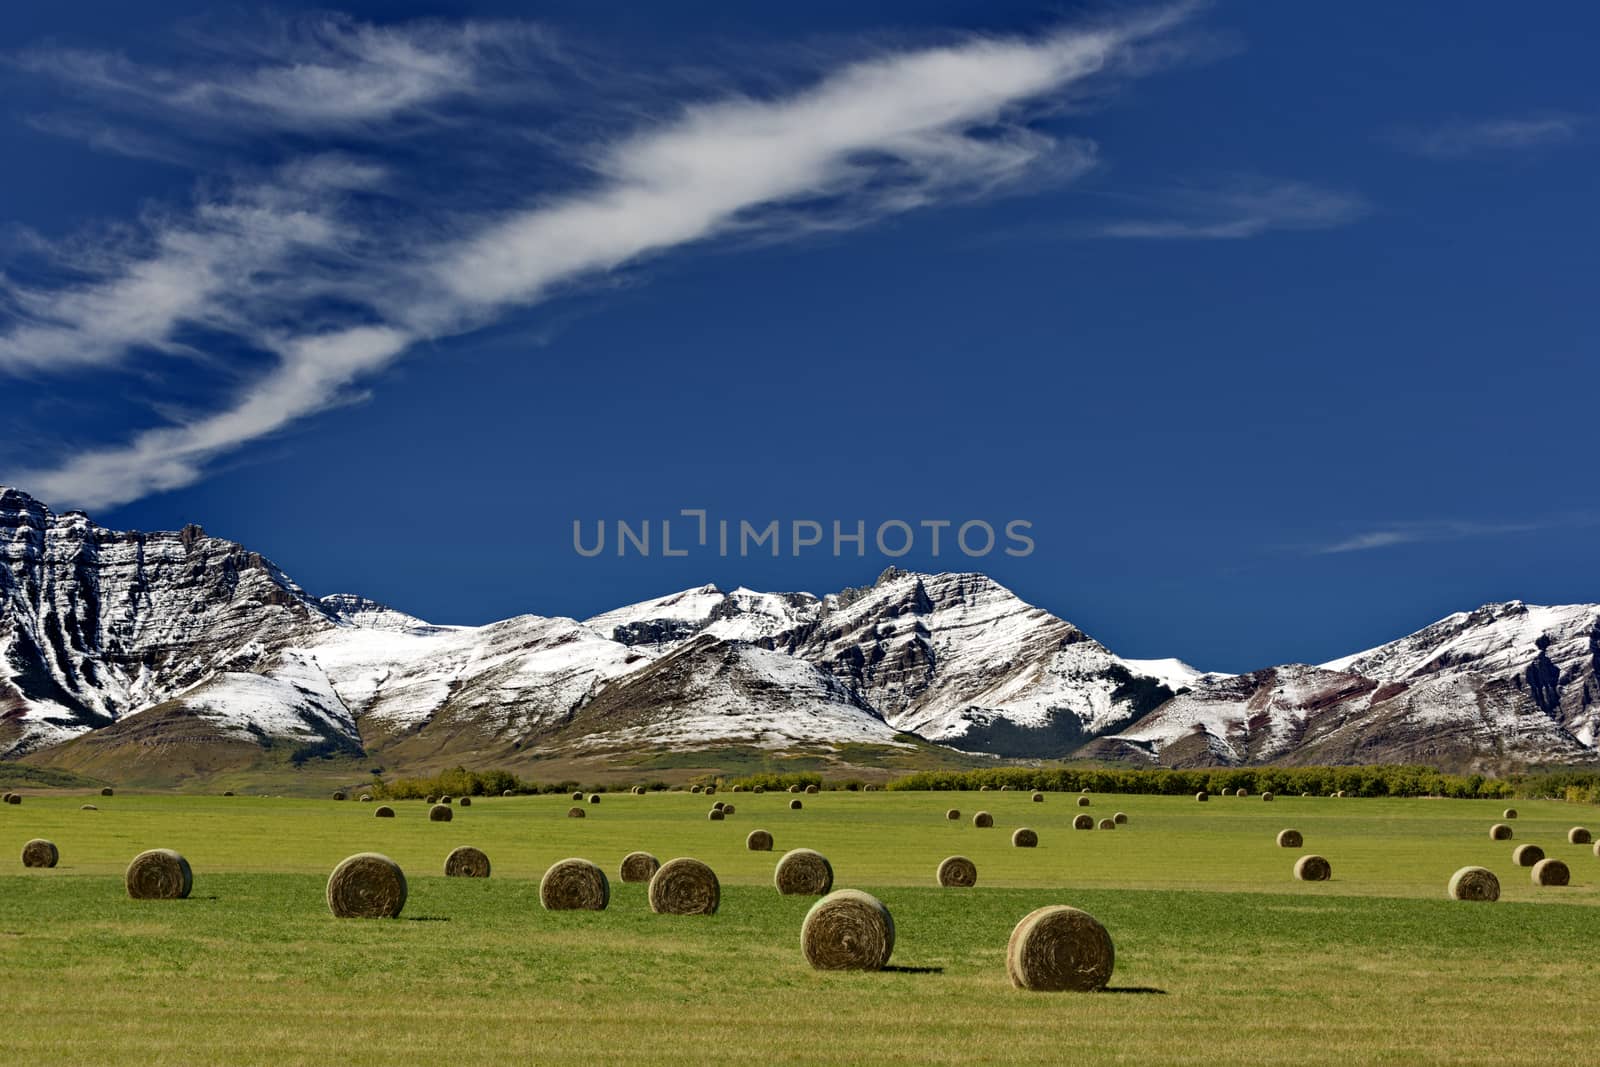 Peaceful Alberta, Canada farm range with rolled hay bales, snowy Canadian Rockies, and beautiful sky.  Horizontal landscape with no people. Location is Pincher Creek near Waterton Lakes National Park. Date is September 13, 2016. 